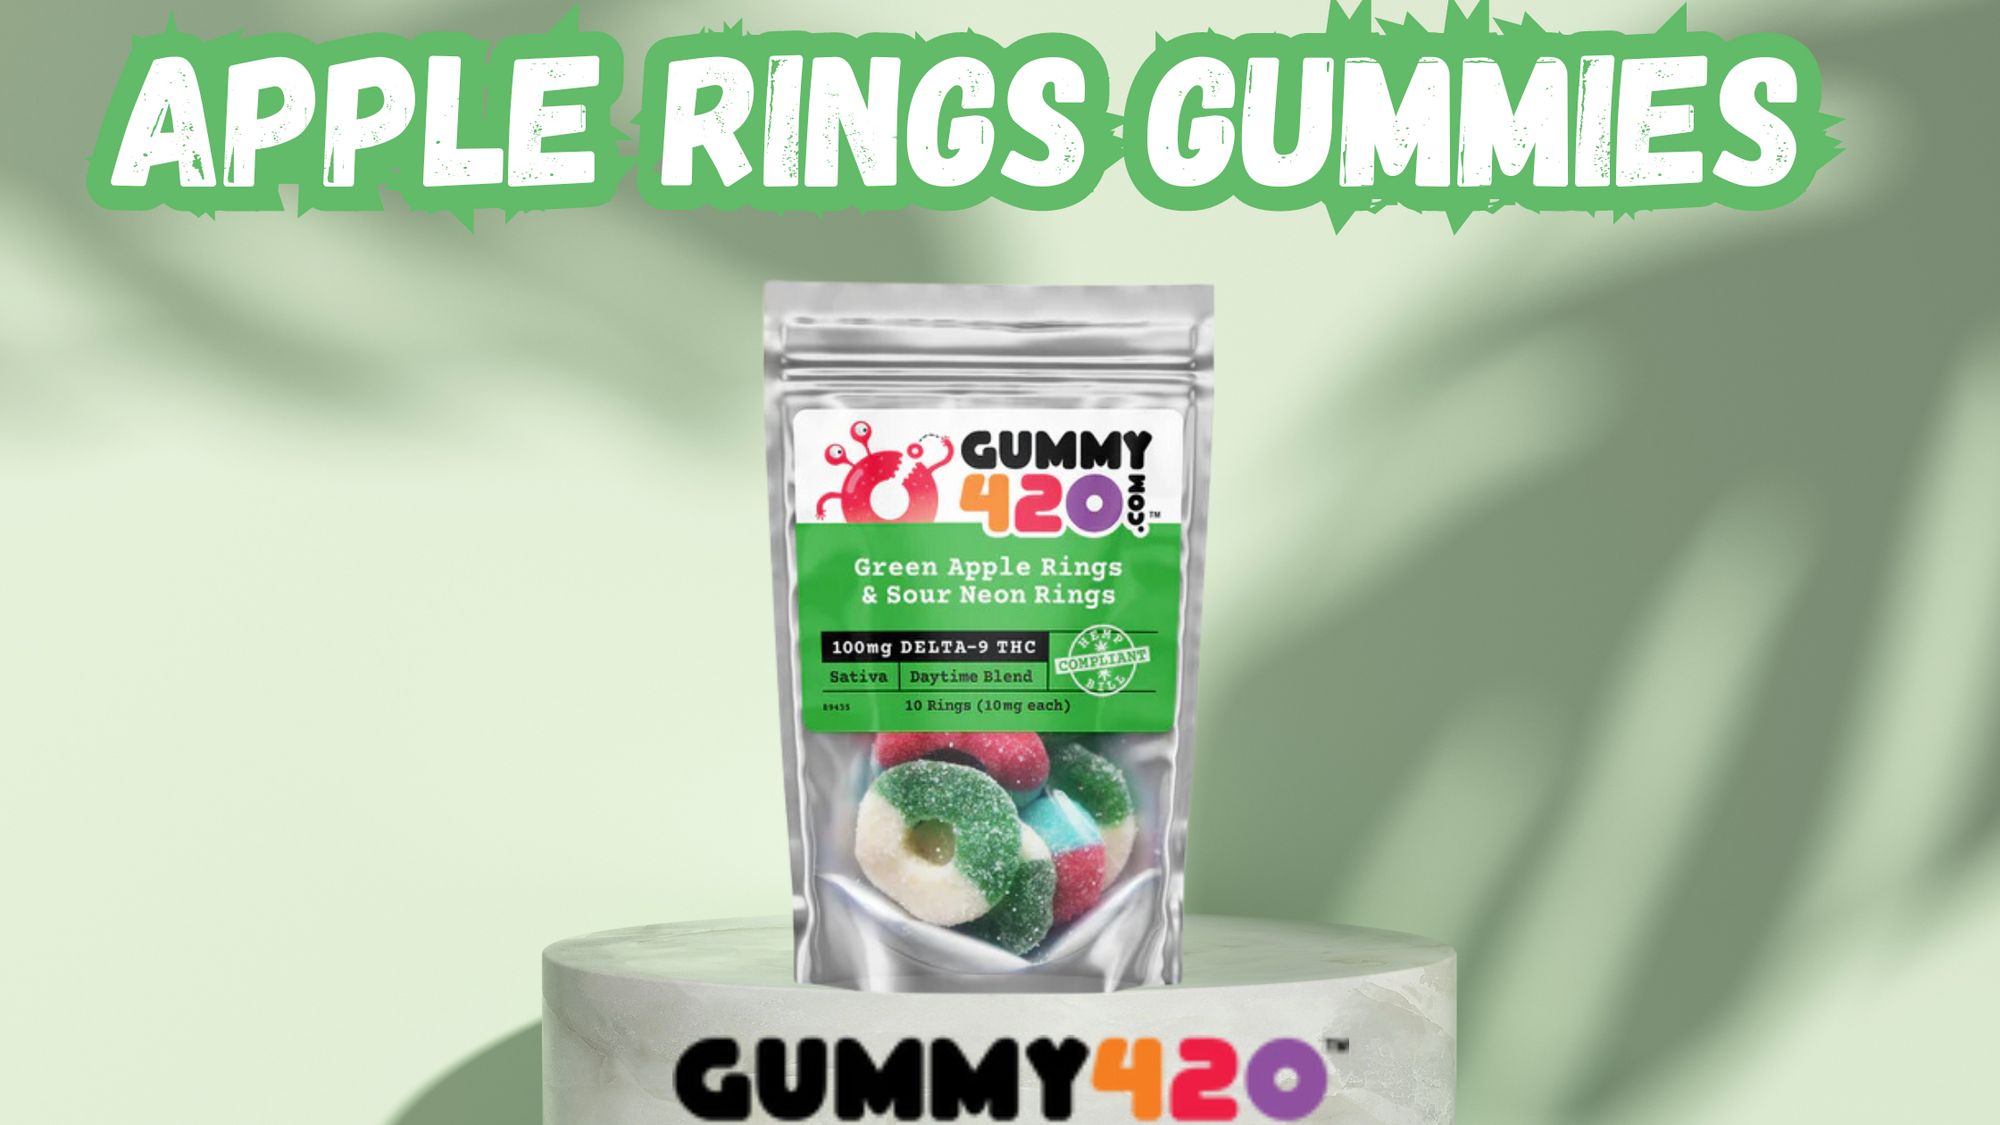 Explore Apple Rings Gummies: The Perfect Snack!